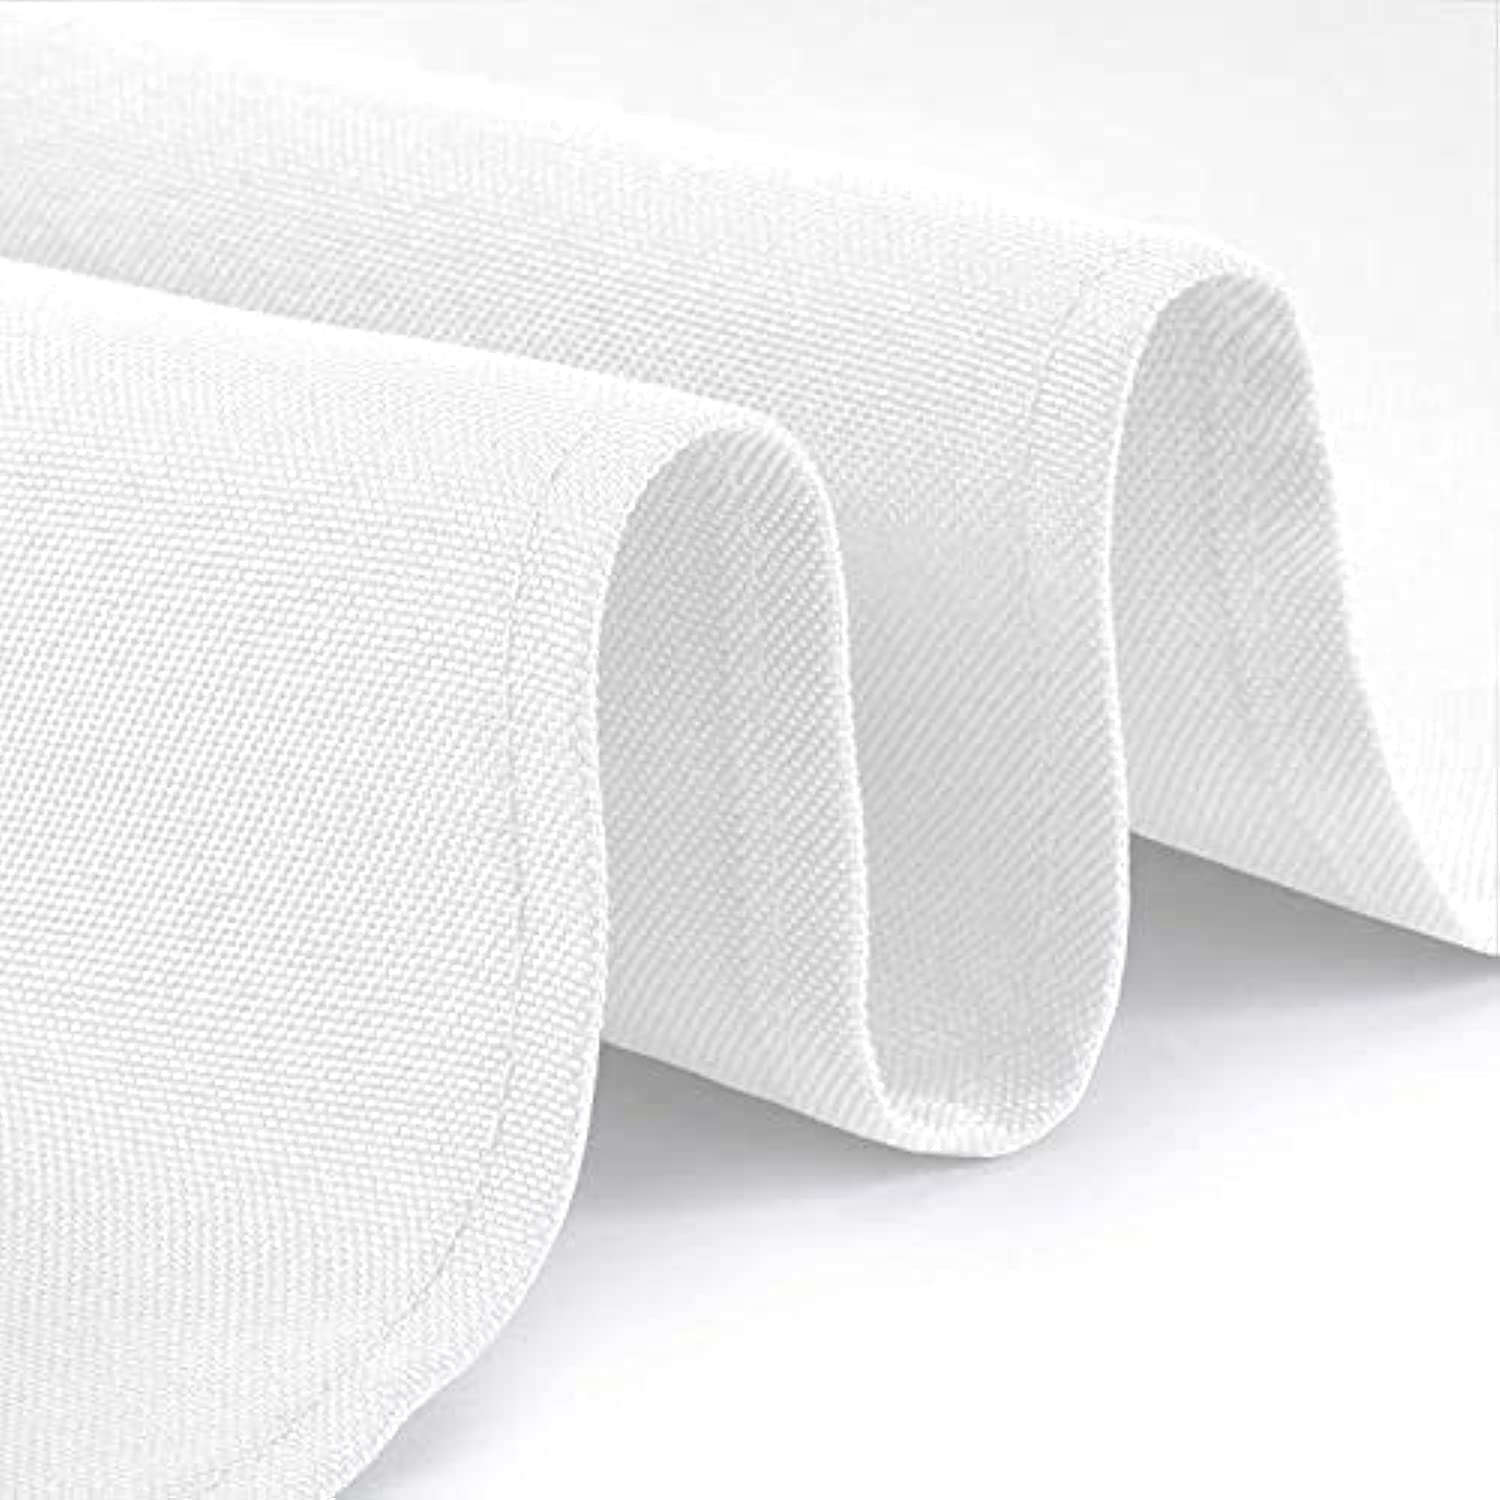 90 Round White Tablecloths - 2 Pack | Premium Quality for Wedding, Banquet, Restaurant | Washable Fabric